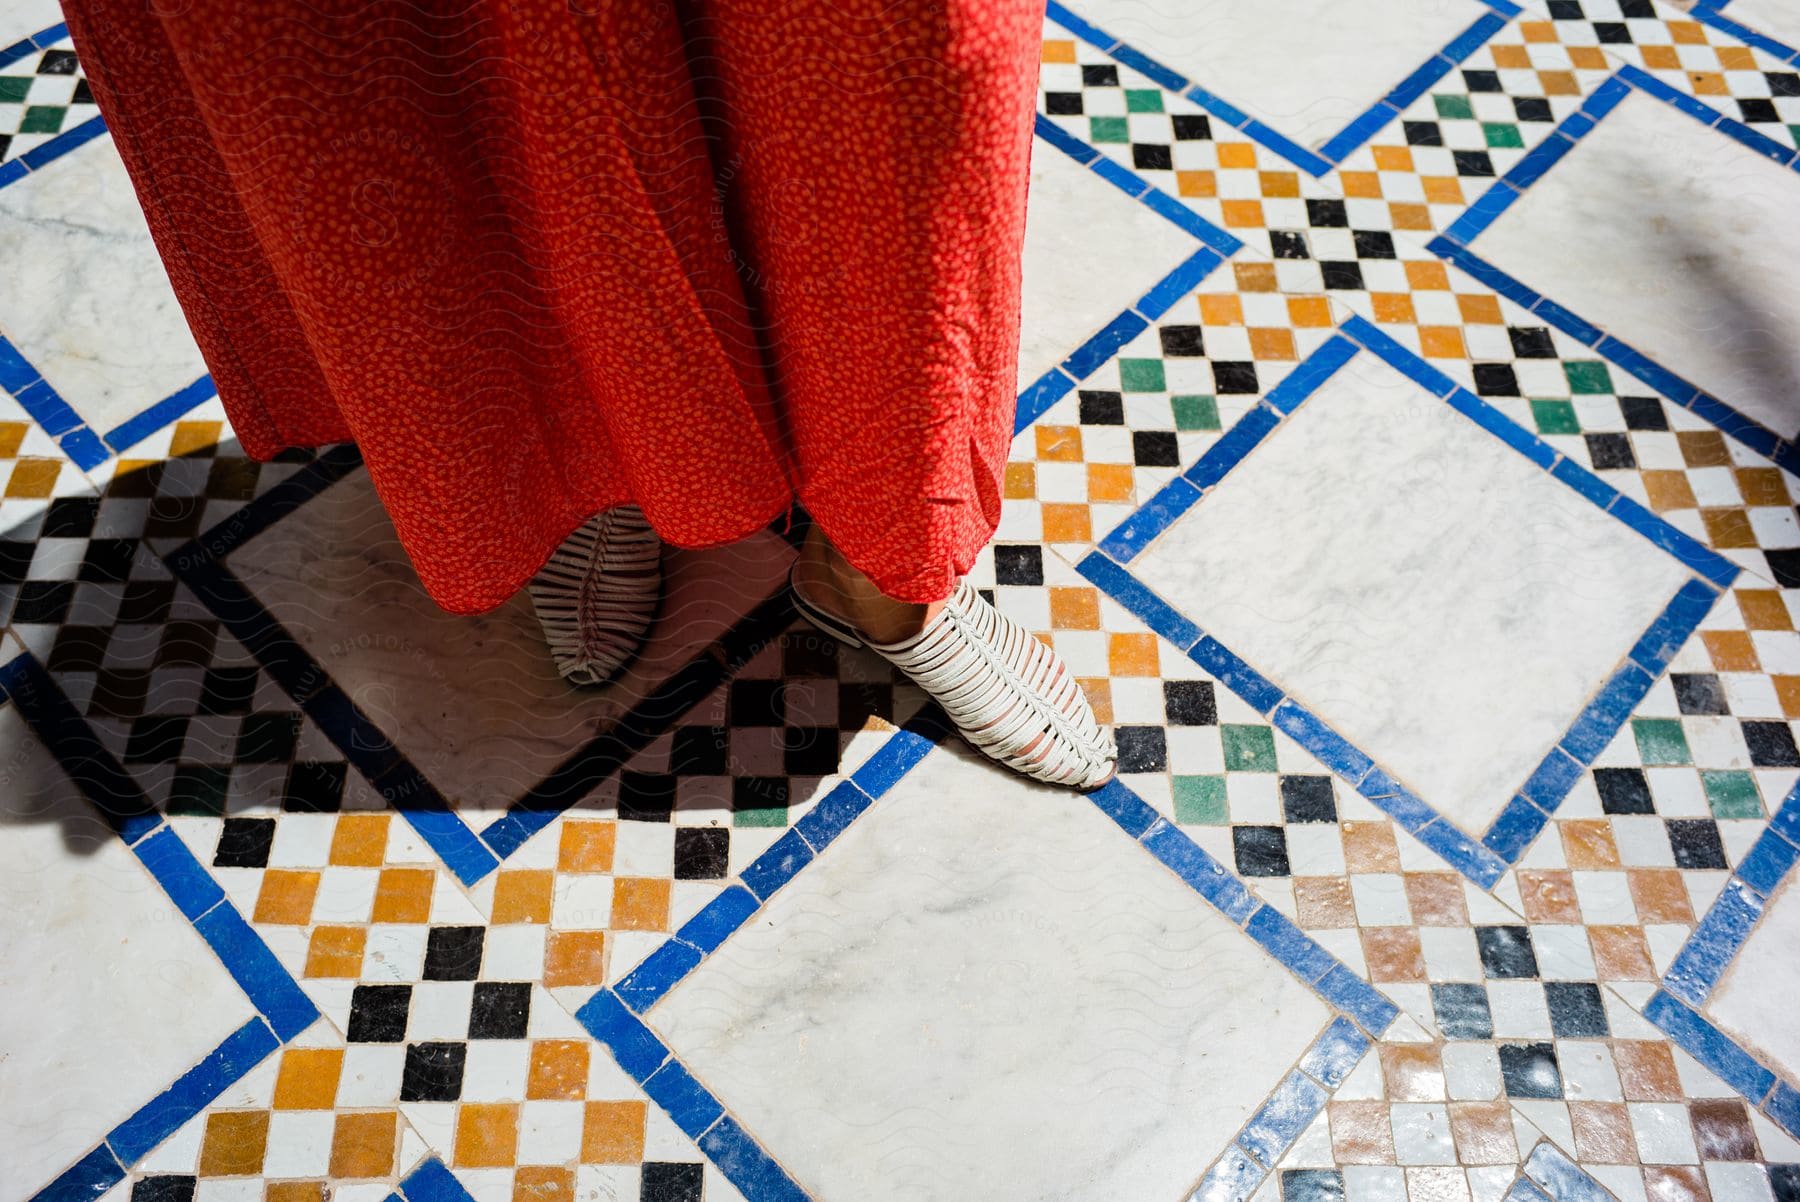 A closeup of a womans shoes and dress on a colorful tile floor